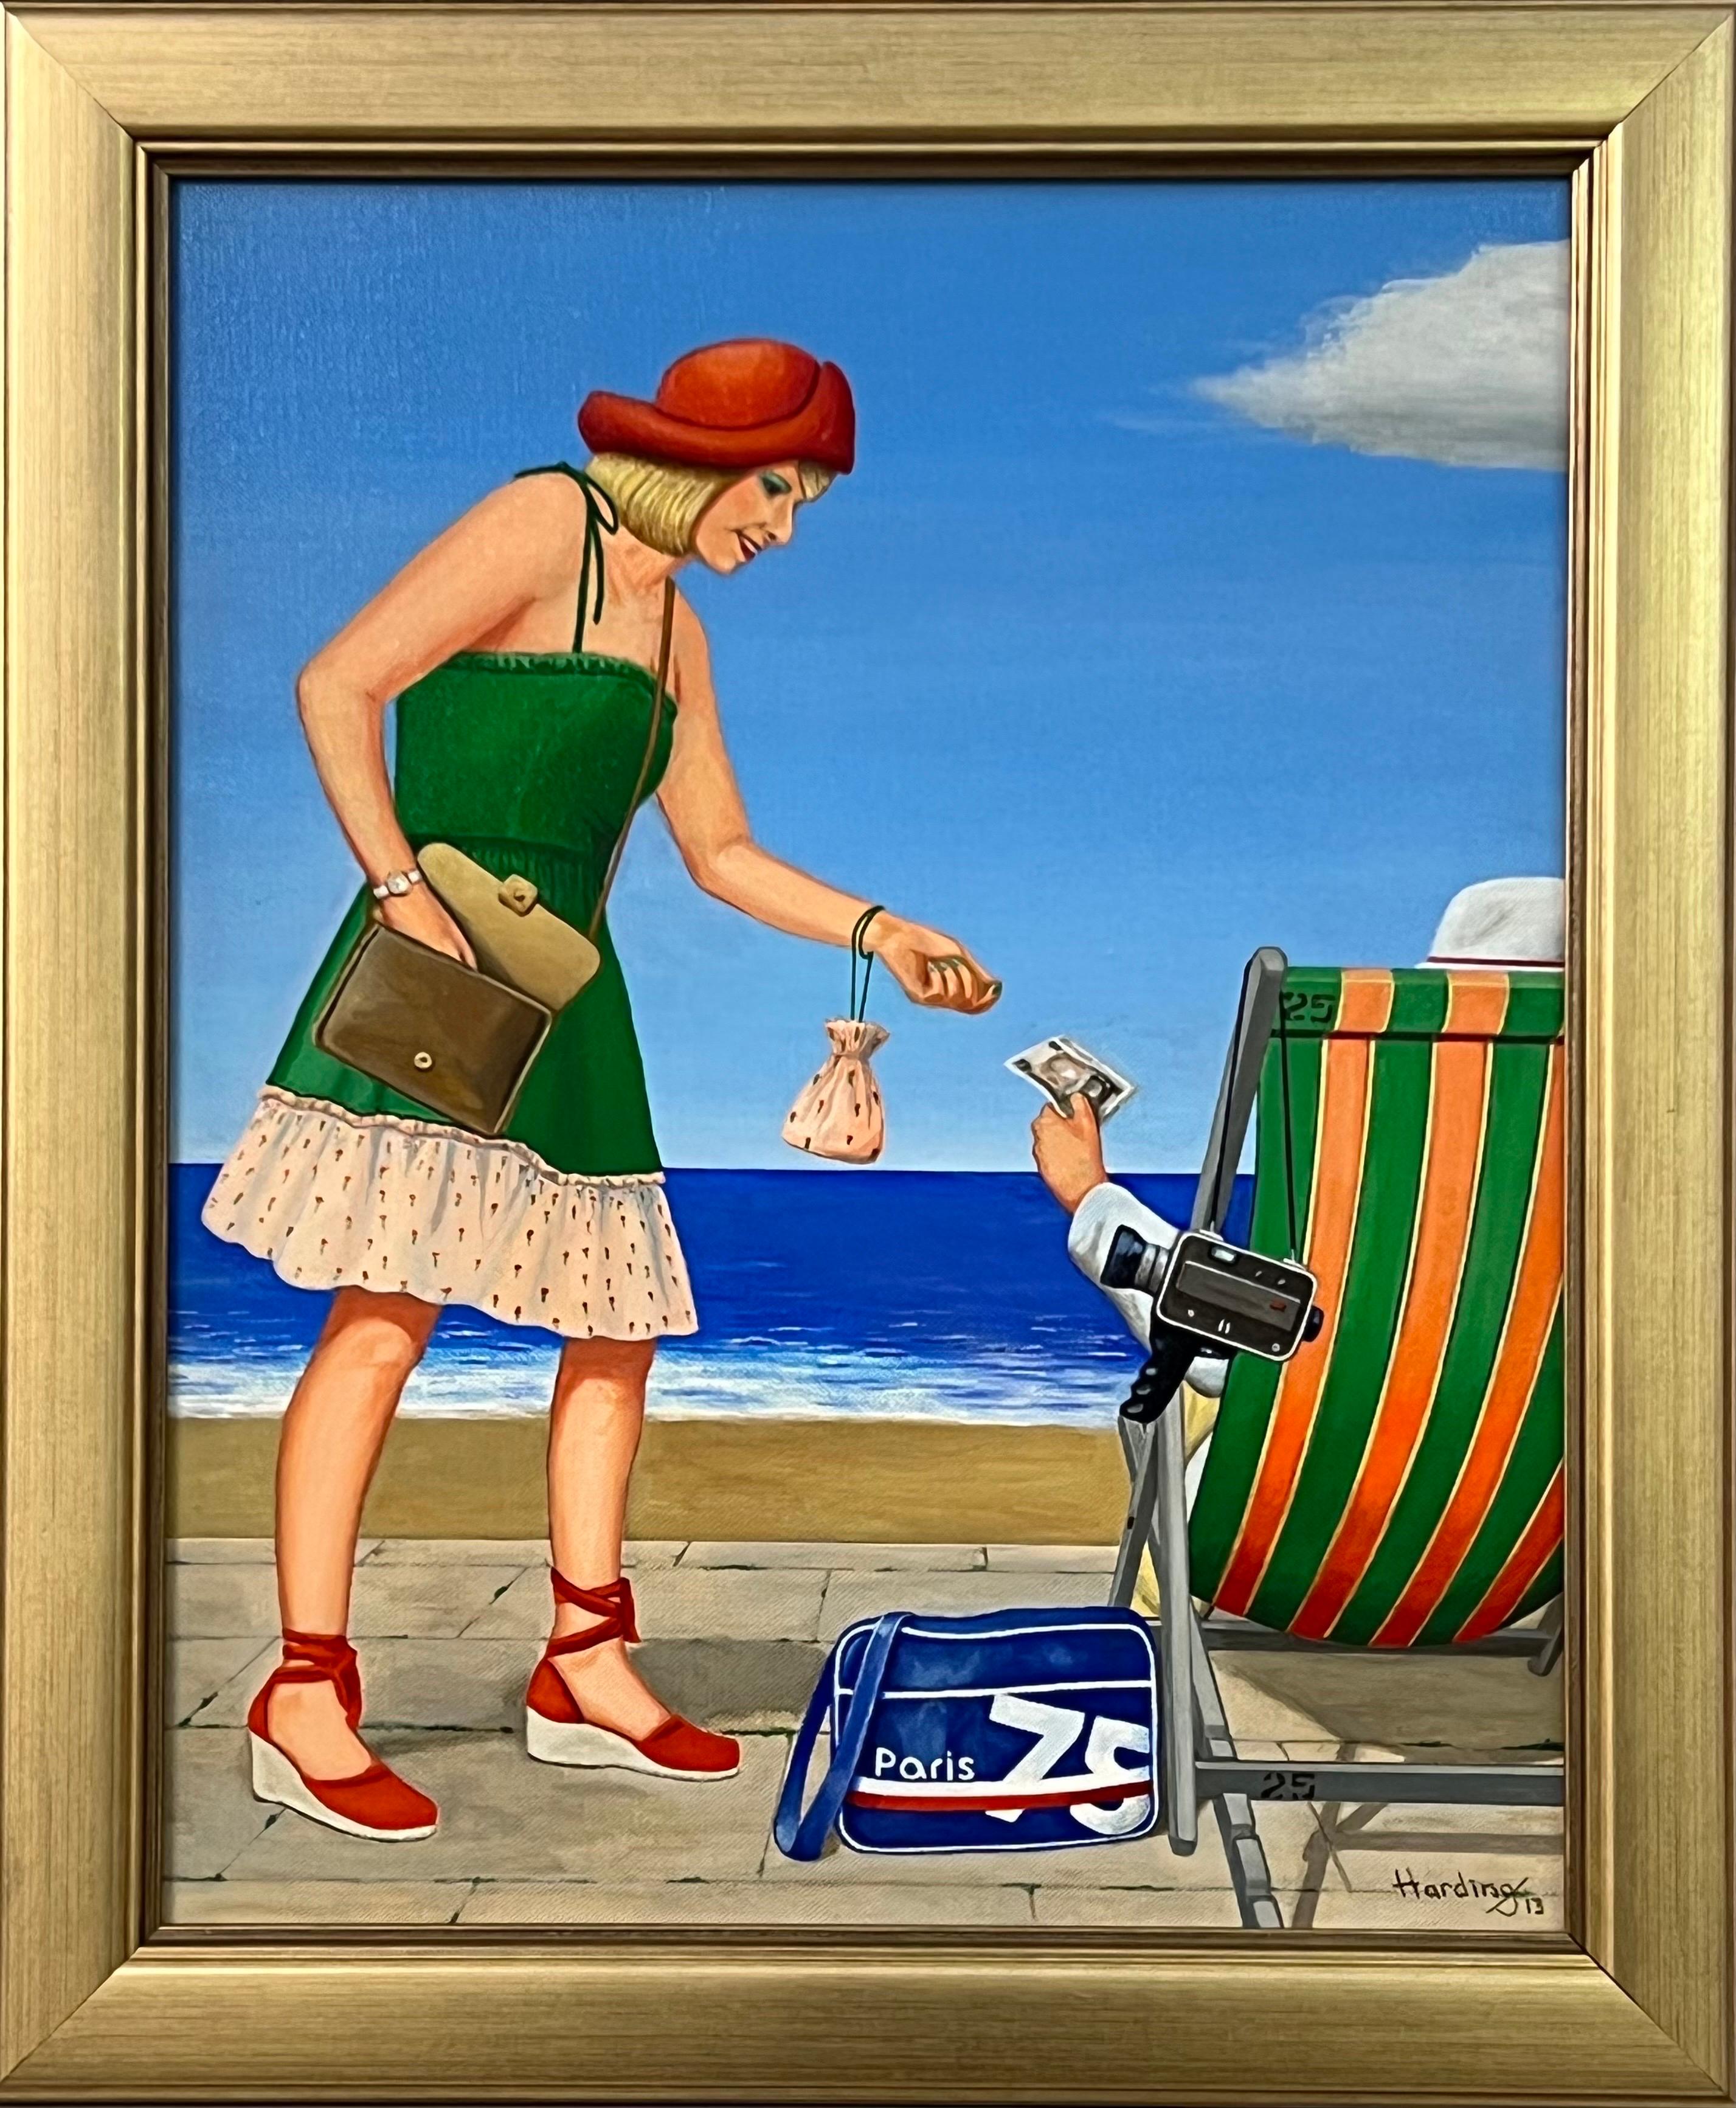 Paul F Harding Figurative Painting - Vintage English Woman at a Seaside Beach Resort in Summer 1960's 1970's England